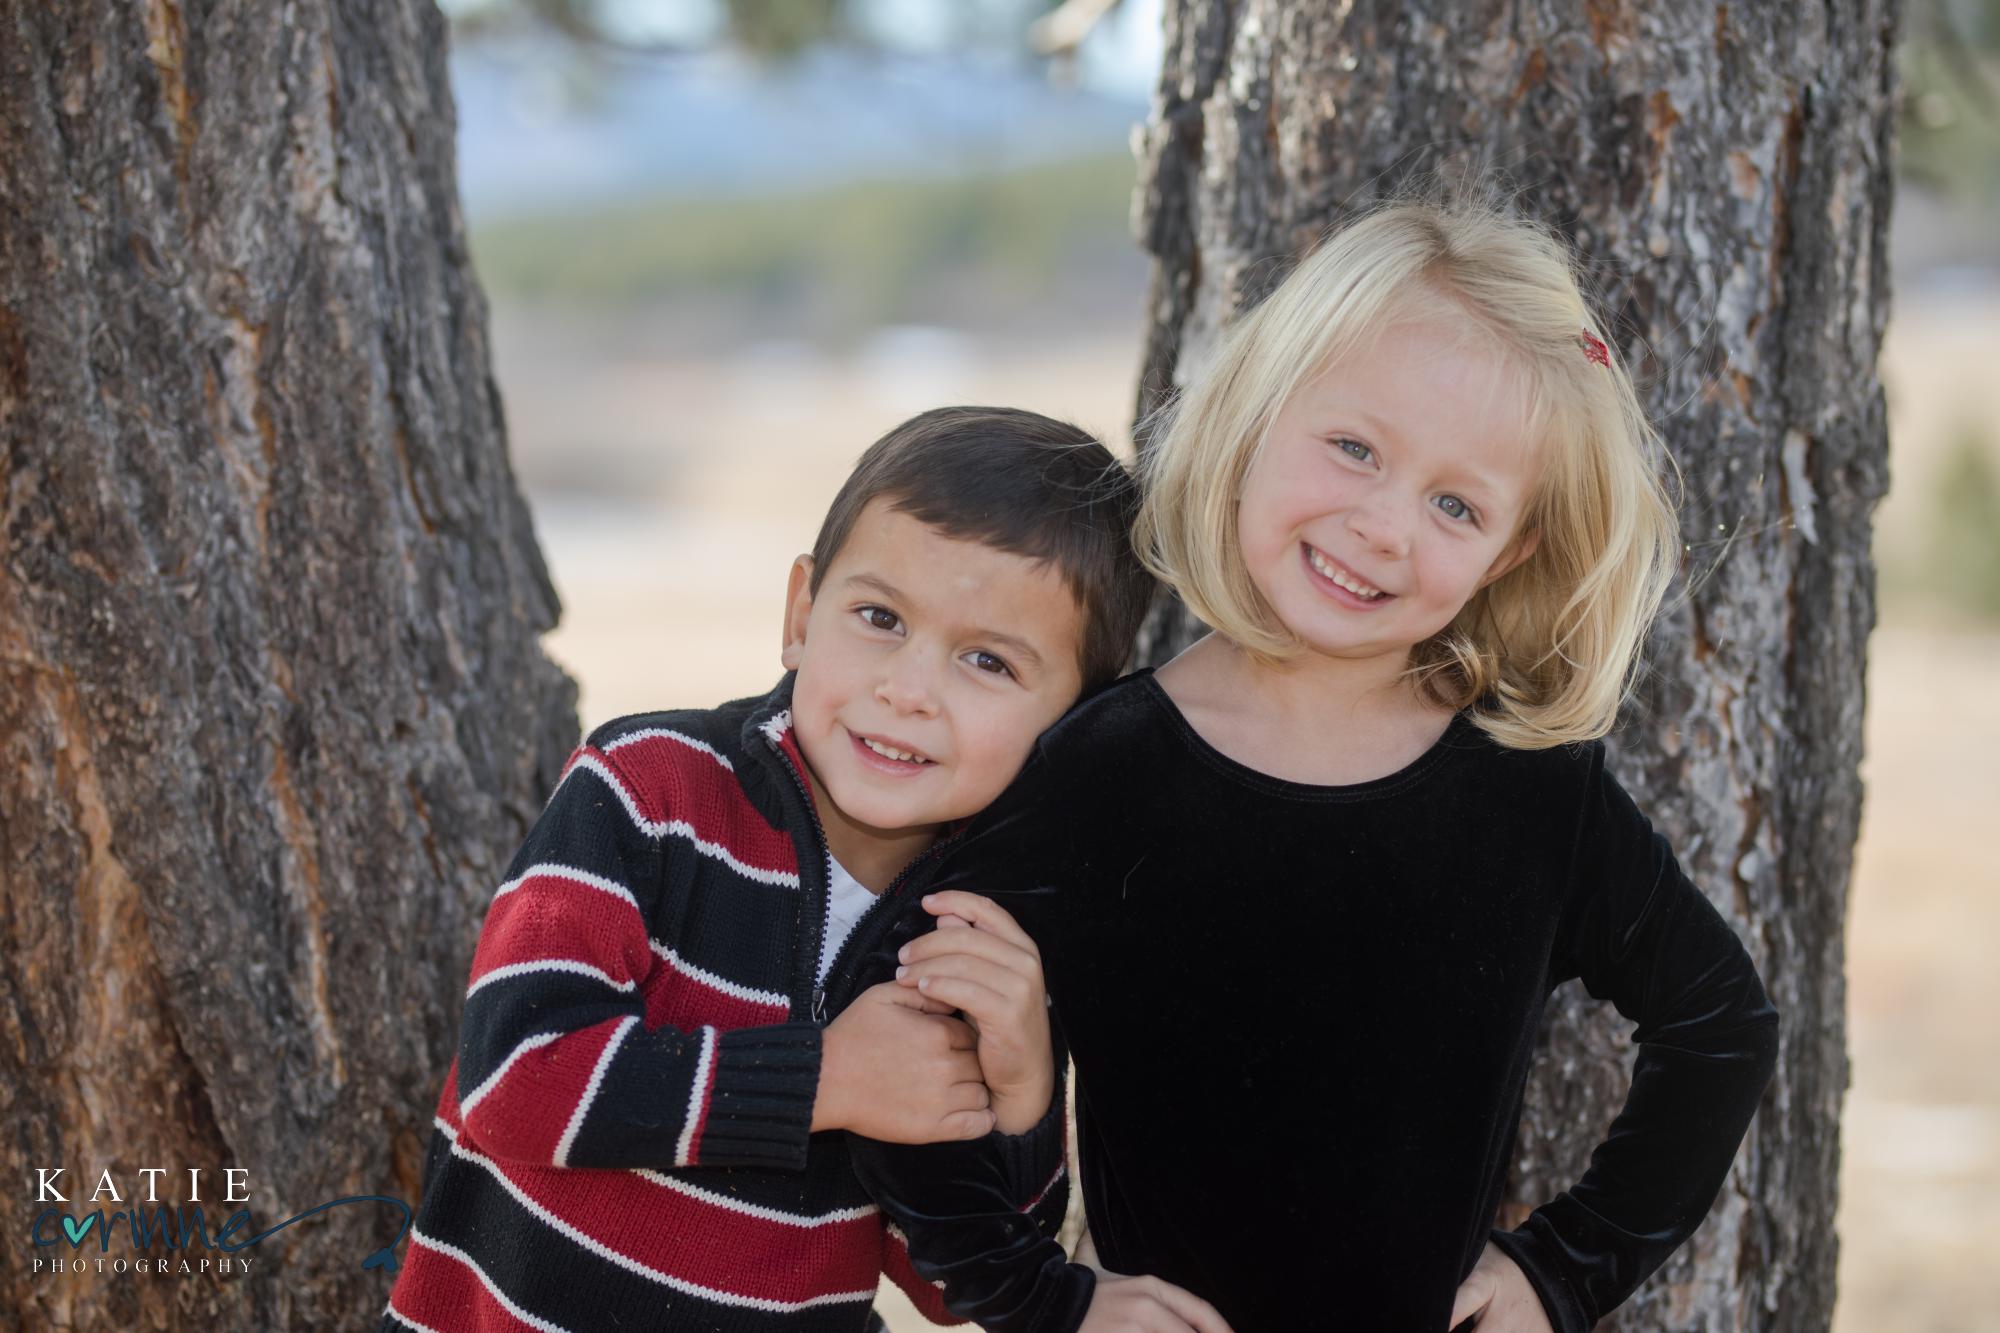 younger brother holds older sister while smiling at camera